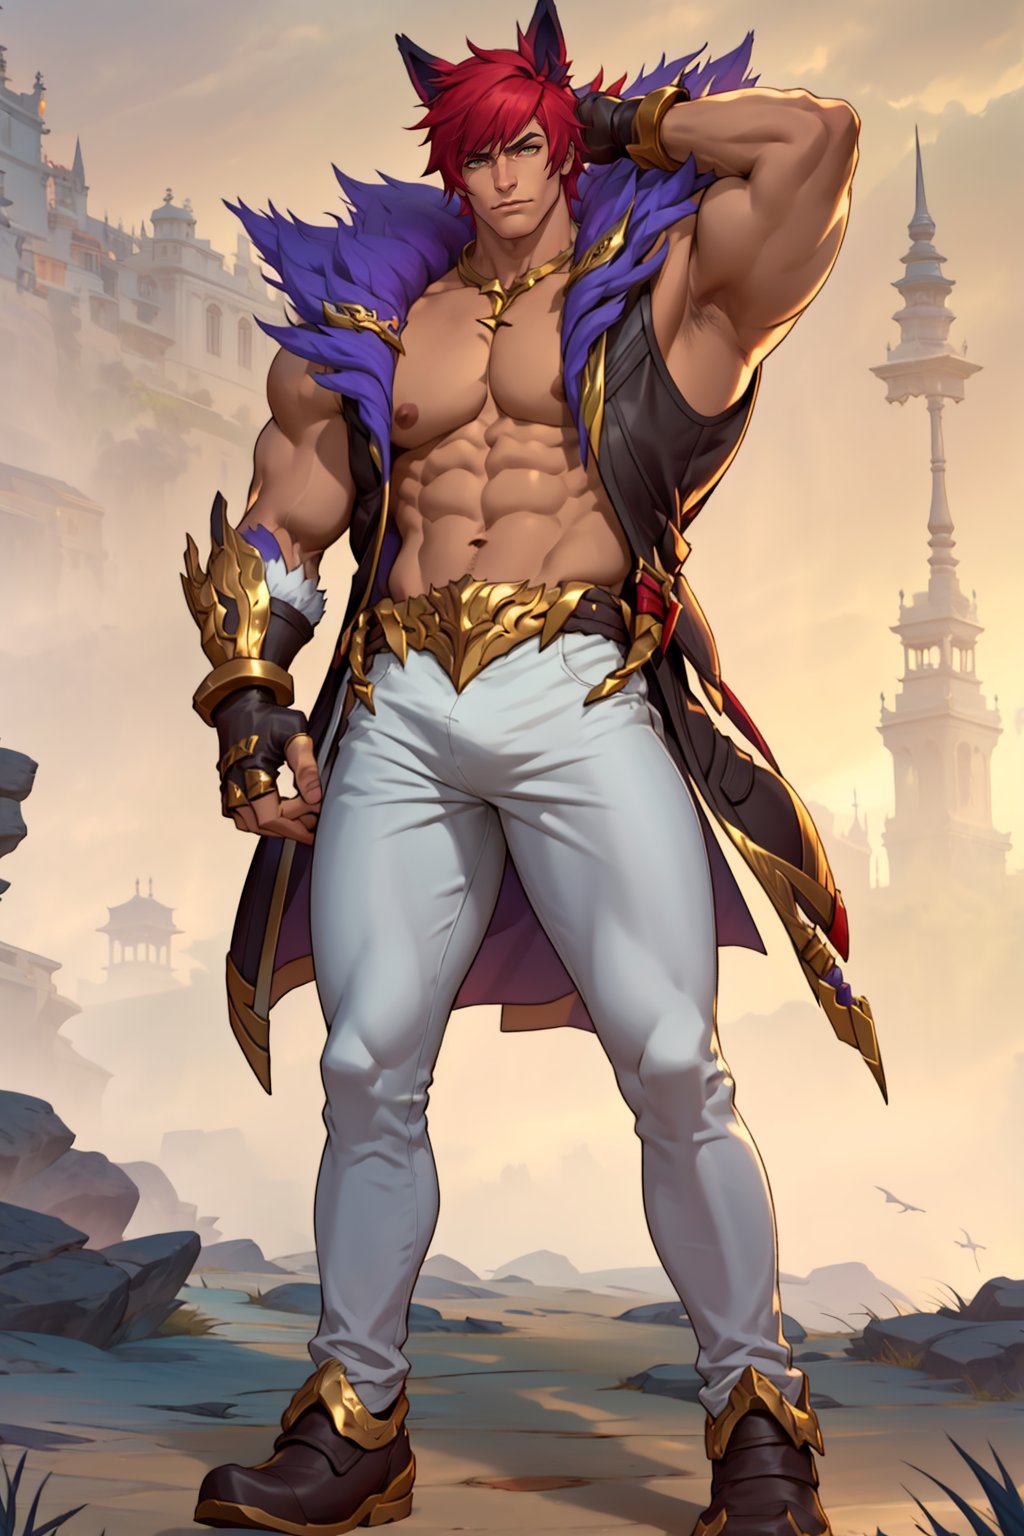 Sett,  Man,  Animal Ears,  Masterpiece,  full body,  photorealistic,  hands behind head,  shocked,  shirtless,  giant bulging crotch area,  muscular,  white background,  good lighting,  Golden eyes,  Short red Hair,  Face,  masculine jaw,  manly,  rugged,  large pectorals,  gold metal,  Purple Fur on Shoulders,  purple,  black sleeveless jacket,  gauntlets,  gloves,  golden accessories,  white pants,